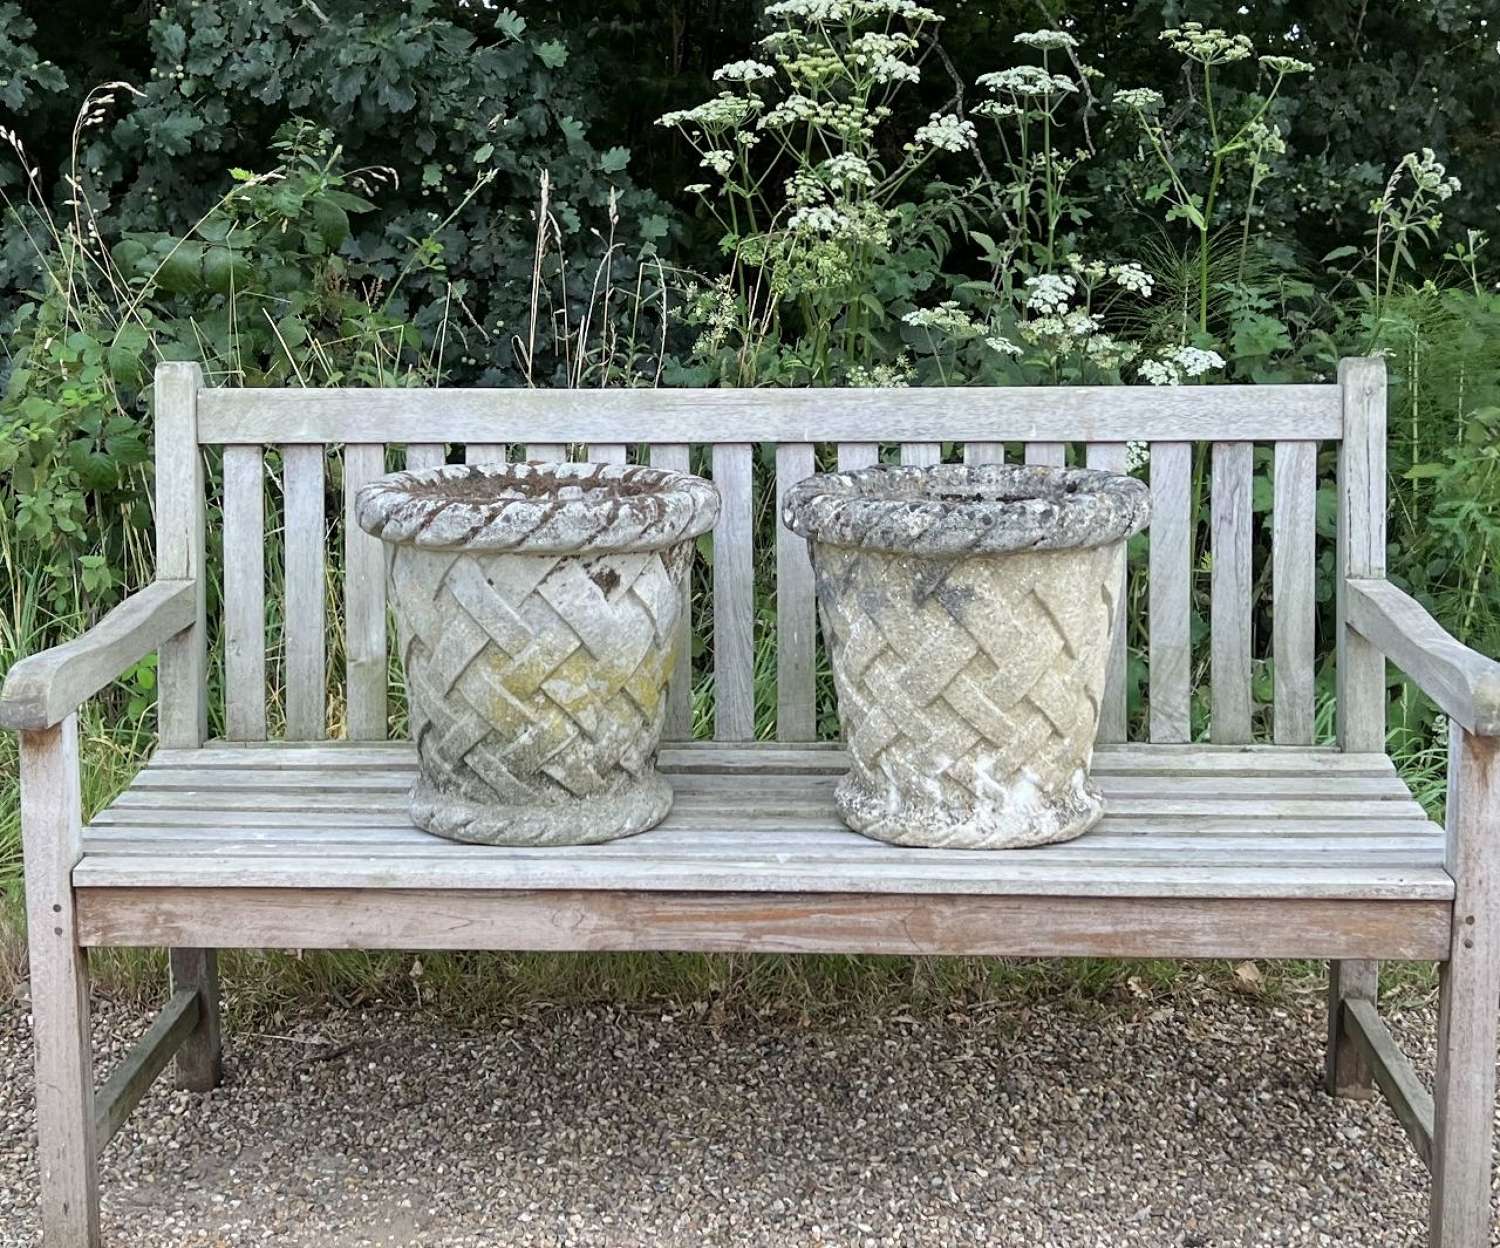 Pair of Patinated Basket Planters